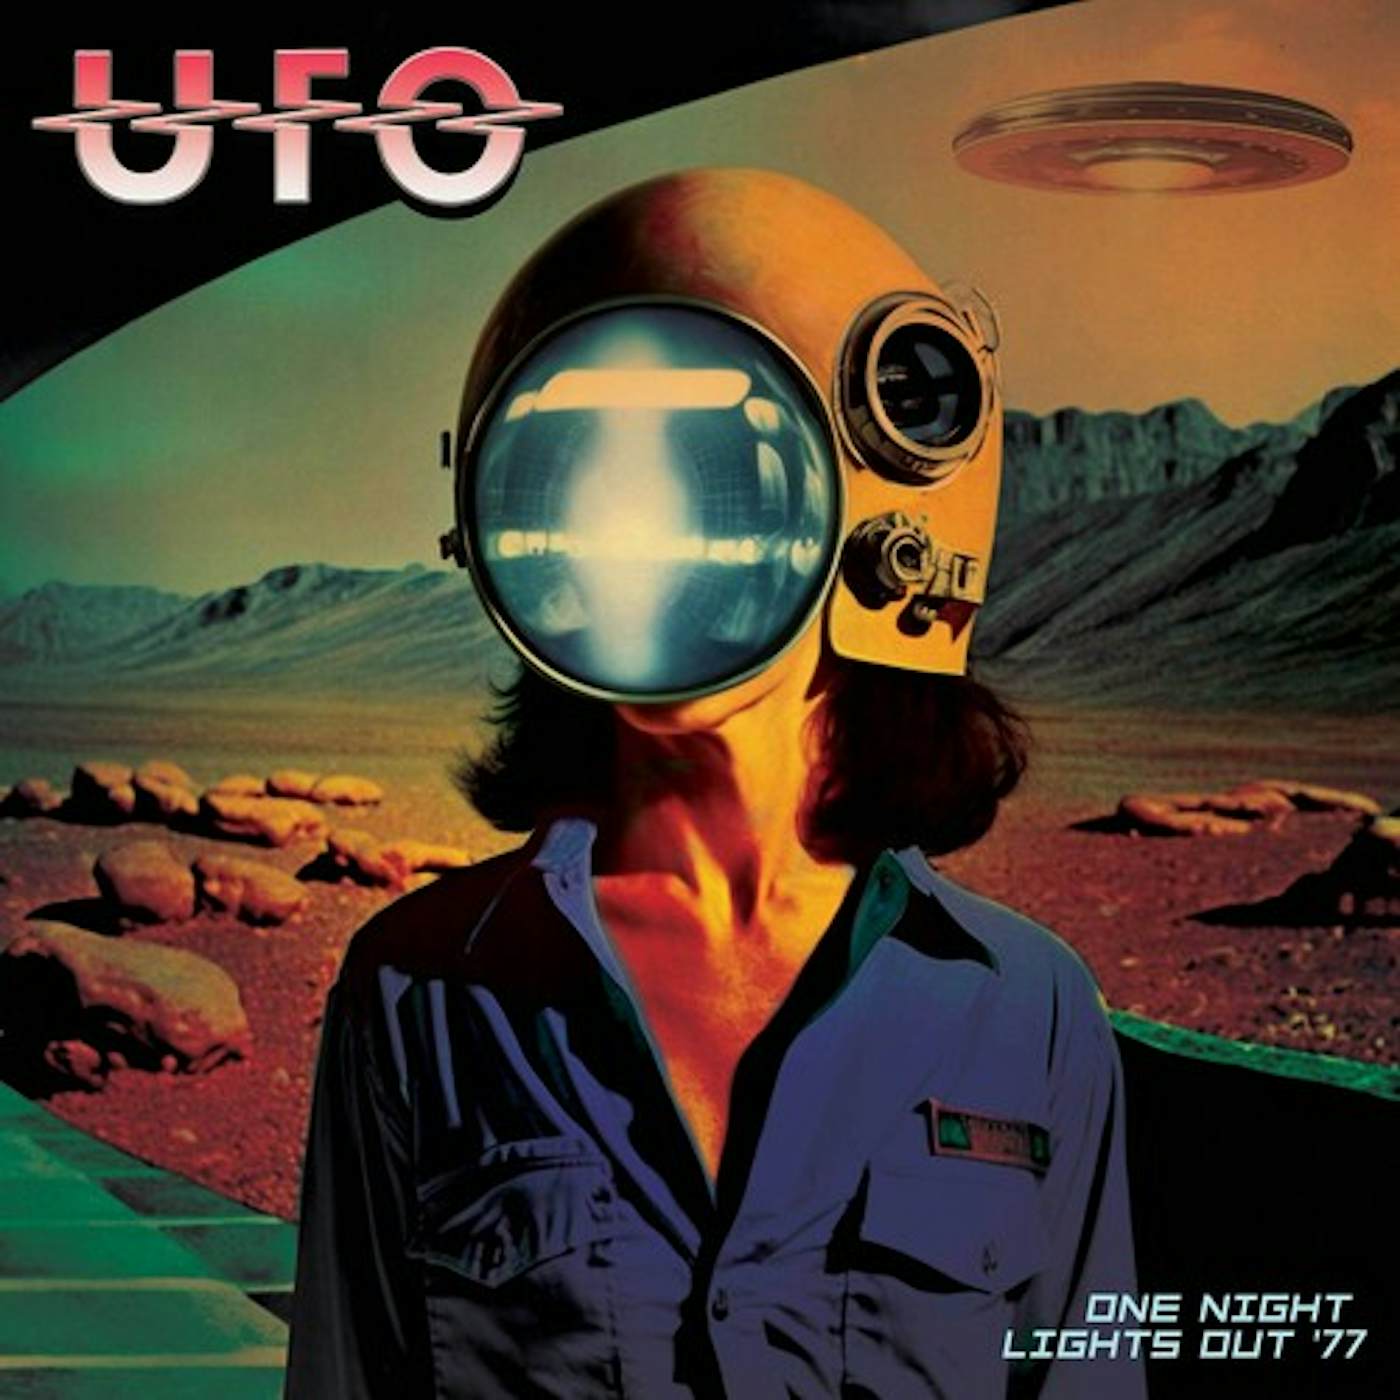 UFO ONE NIGHT LIGHTS OUT '77 CD